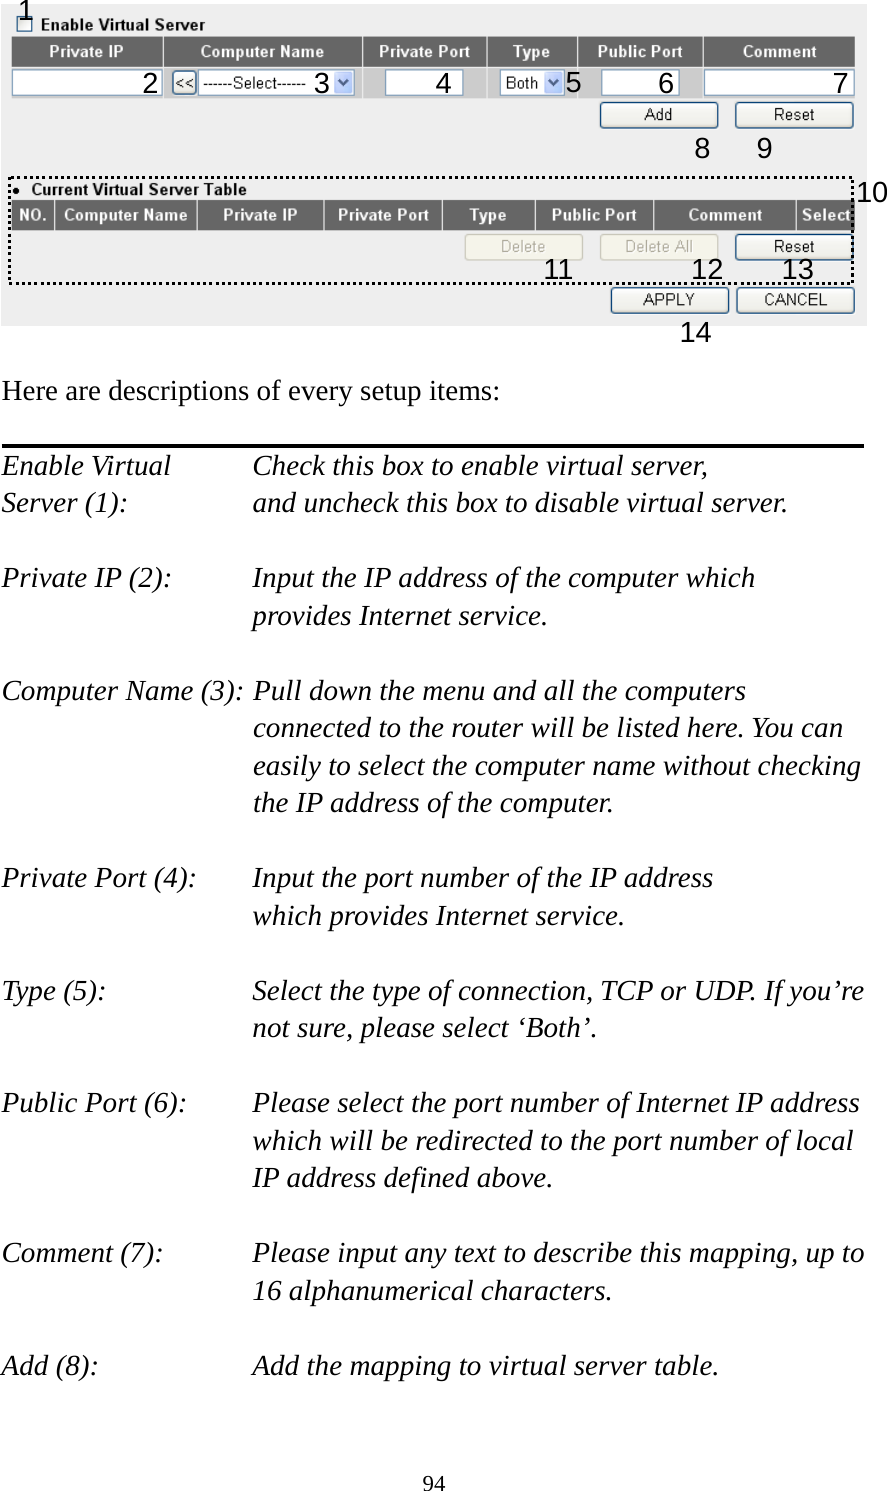 94   Here are descriptions of every setup items:  Enable Virtual      Check this box to enable virtual server, Server (1):       and uncheck this box to disable virtual server.  Private IP (2):      Input the IP address of the computer which      provides Internet service.  Computer Name (3): Pull down the menu and all the computers connected to the router will be listed here. You can easily to select the computer name without checking the IP address of the computer.  Private Port (4):    Input the port number of the IP address      which provides Internet service.  Type (5):    Select the type of connection, TCP or UDP. If you’re not sure, please select ‘Both’.  Public Port (6):    Please select the port number of Internet IP address which will be redirected to the port number of local IP address defined above.  Comment (7):    Please input any text to describe this mapping, up to 16 alphanumerical characters.  Add (8):        Add the mapping to virtual server table.  1 2 3 4 5 8 9 10 11 12 13 14 7 6 